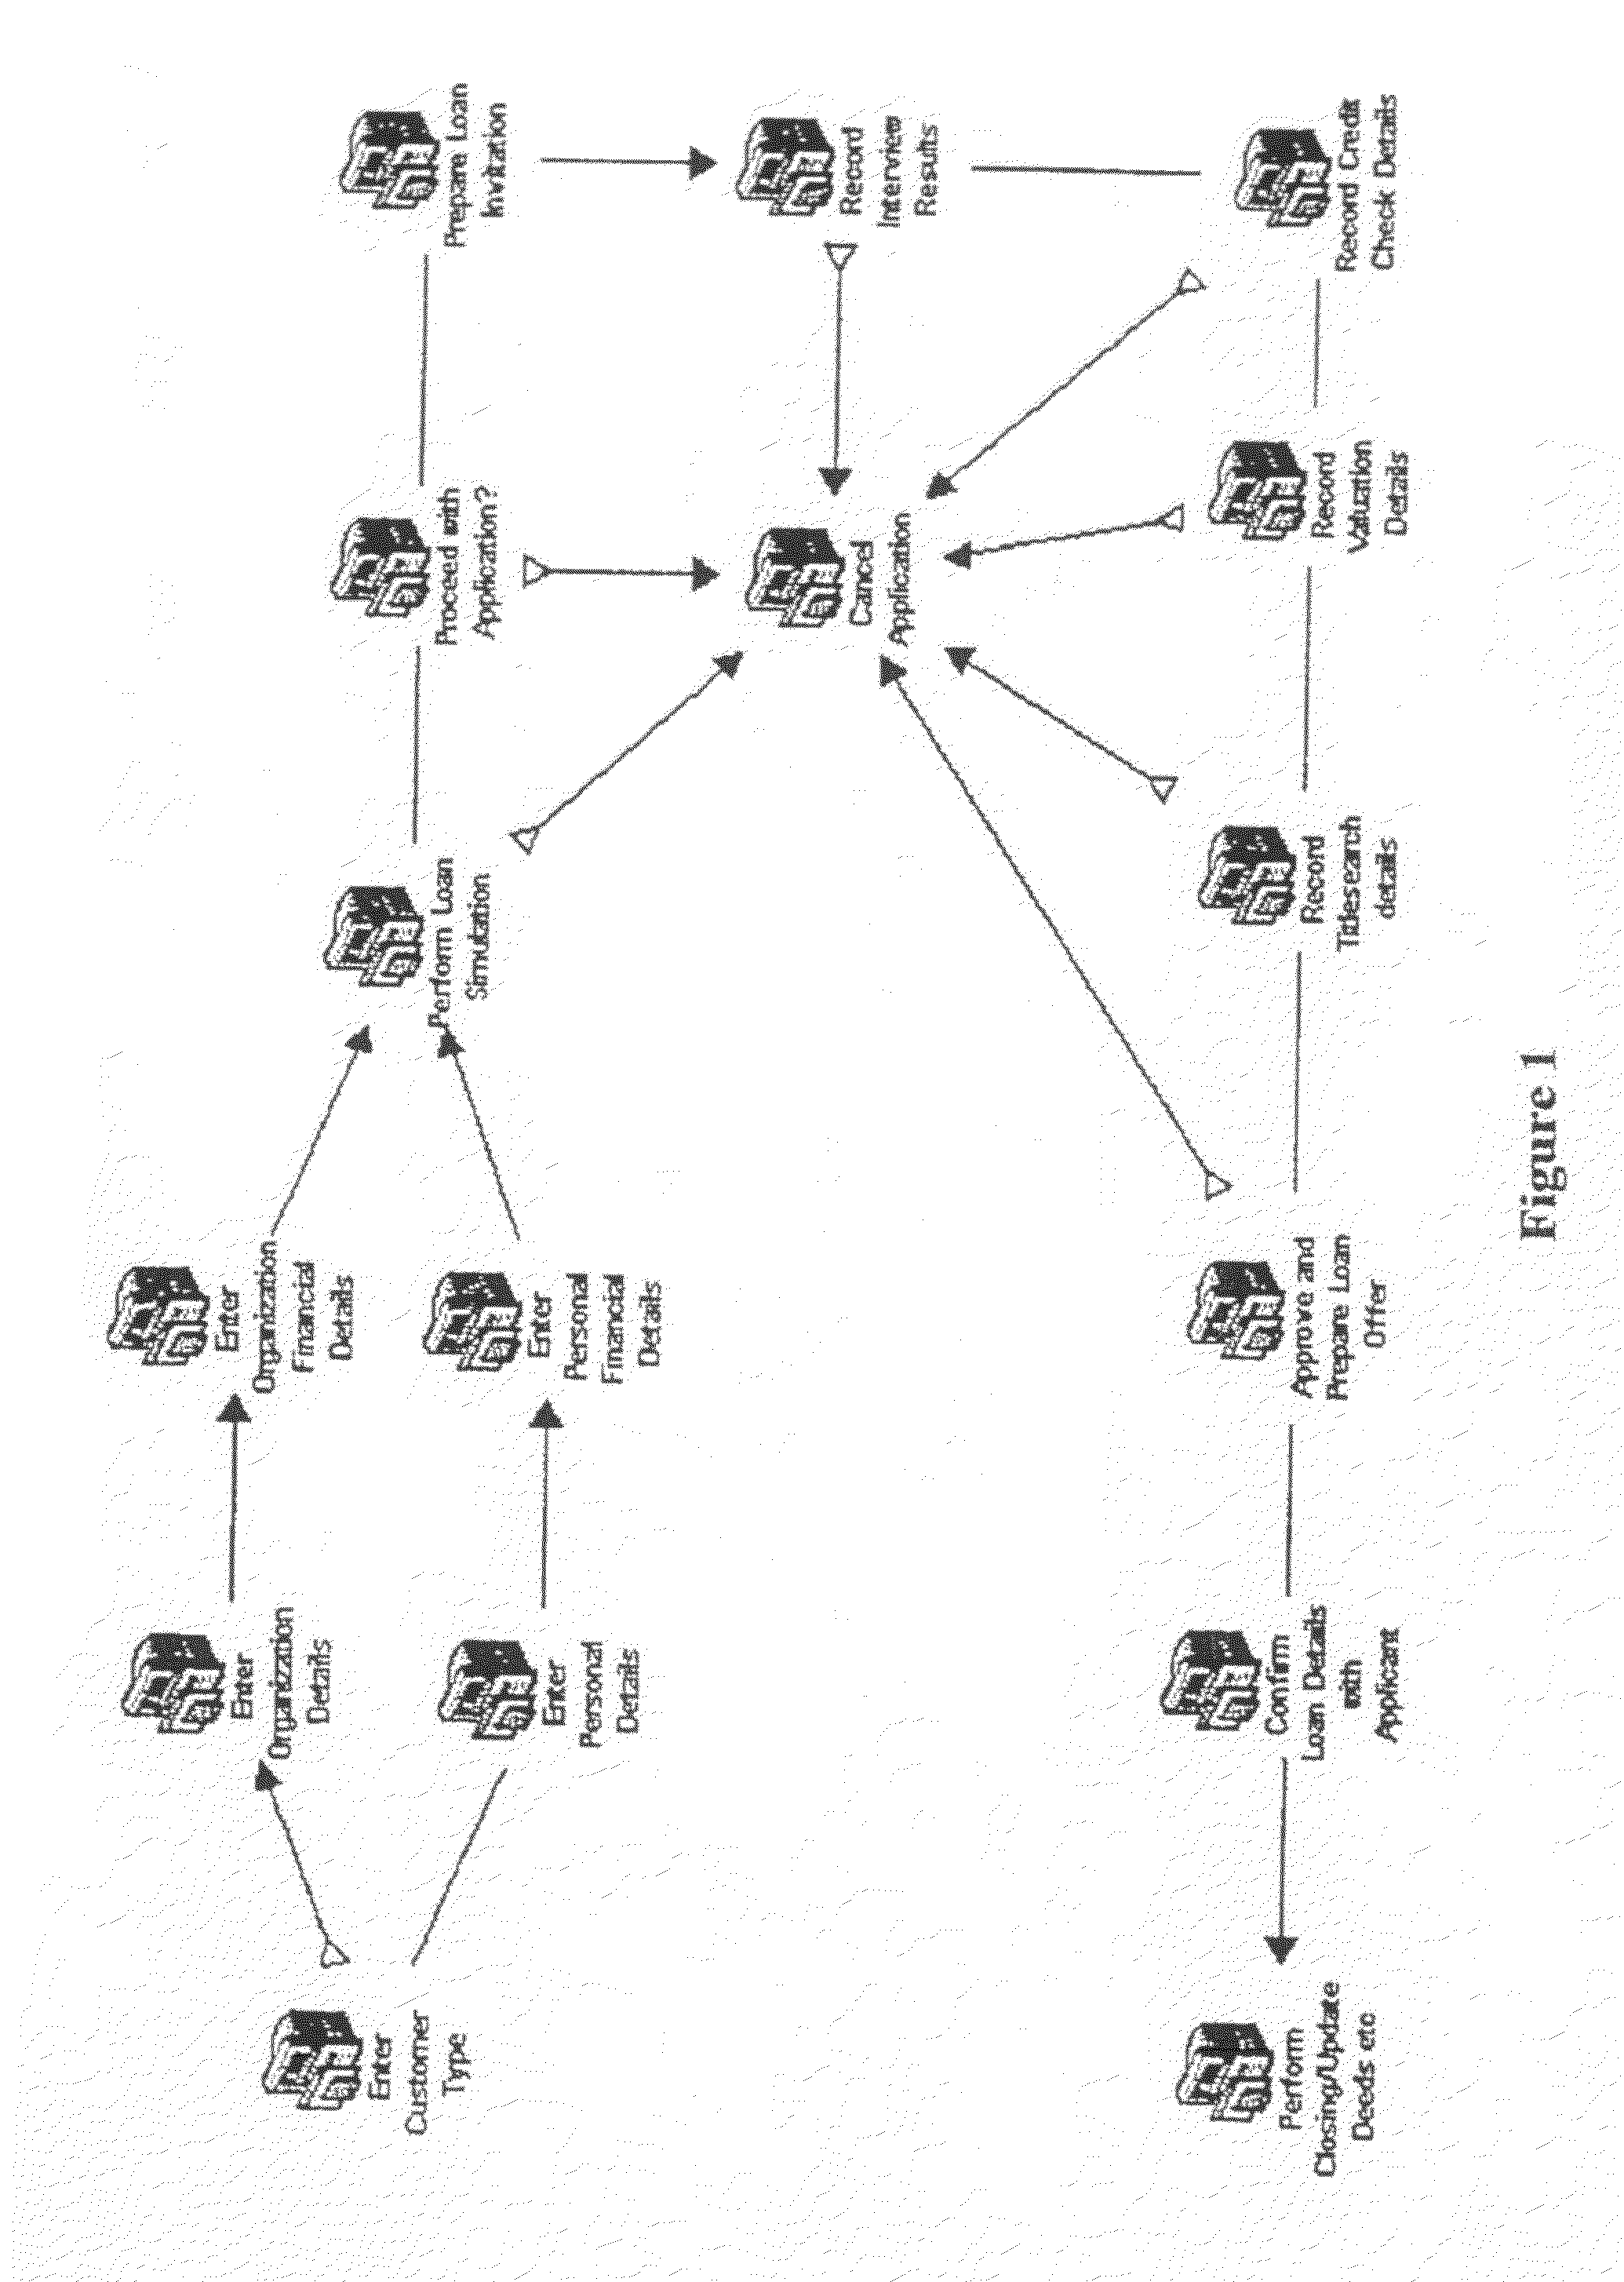 Systems and methods for executing business processes over a network